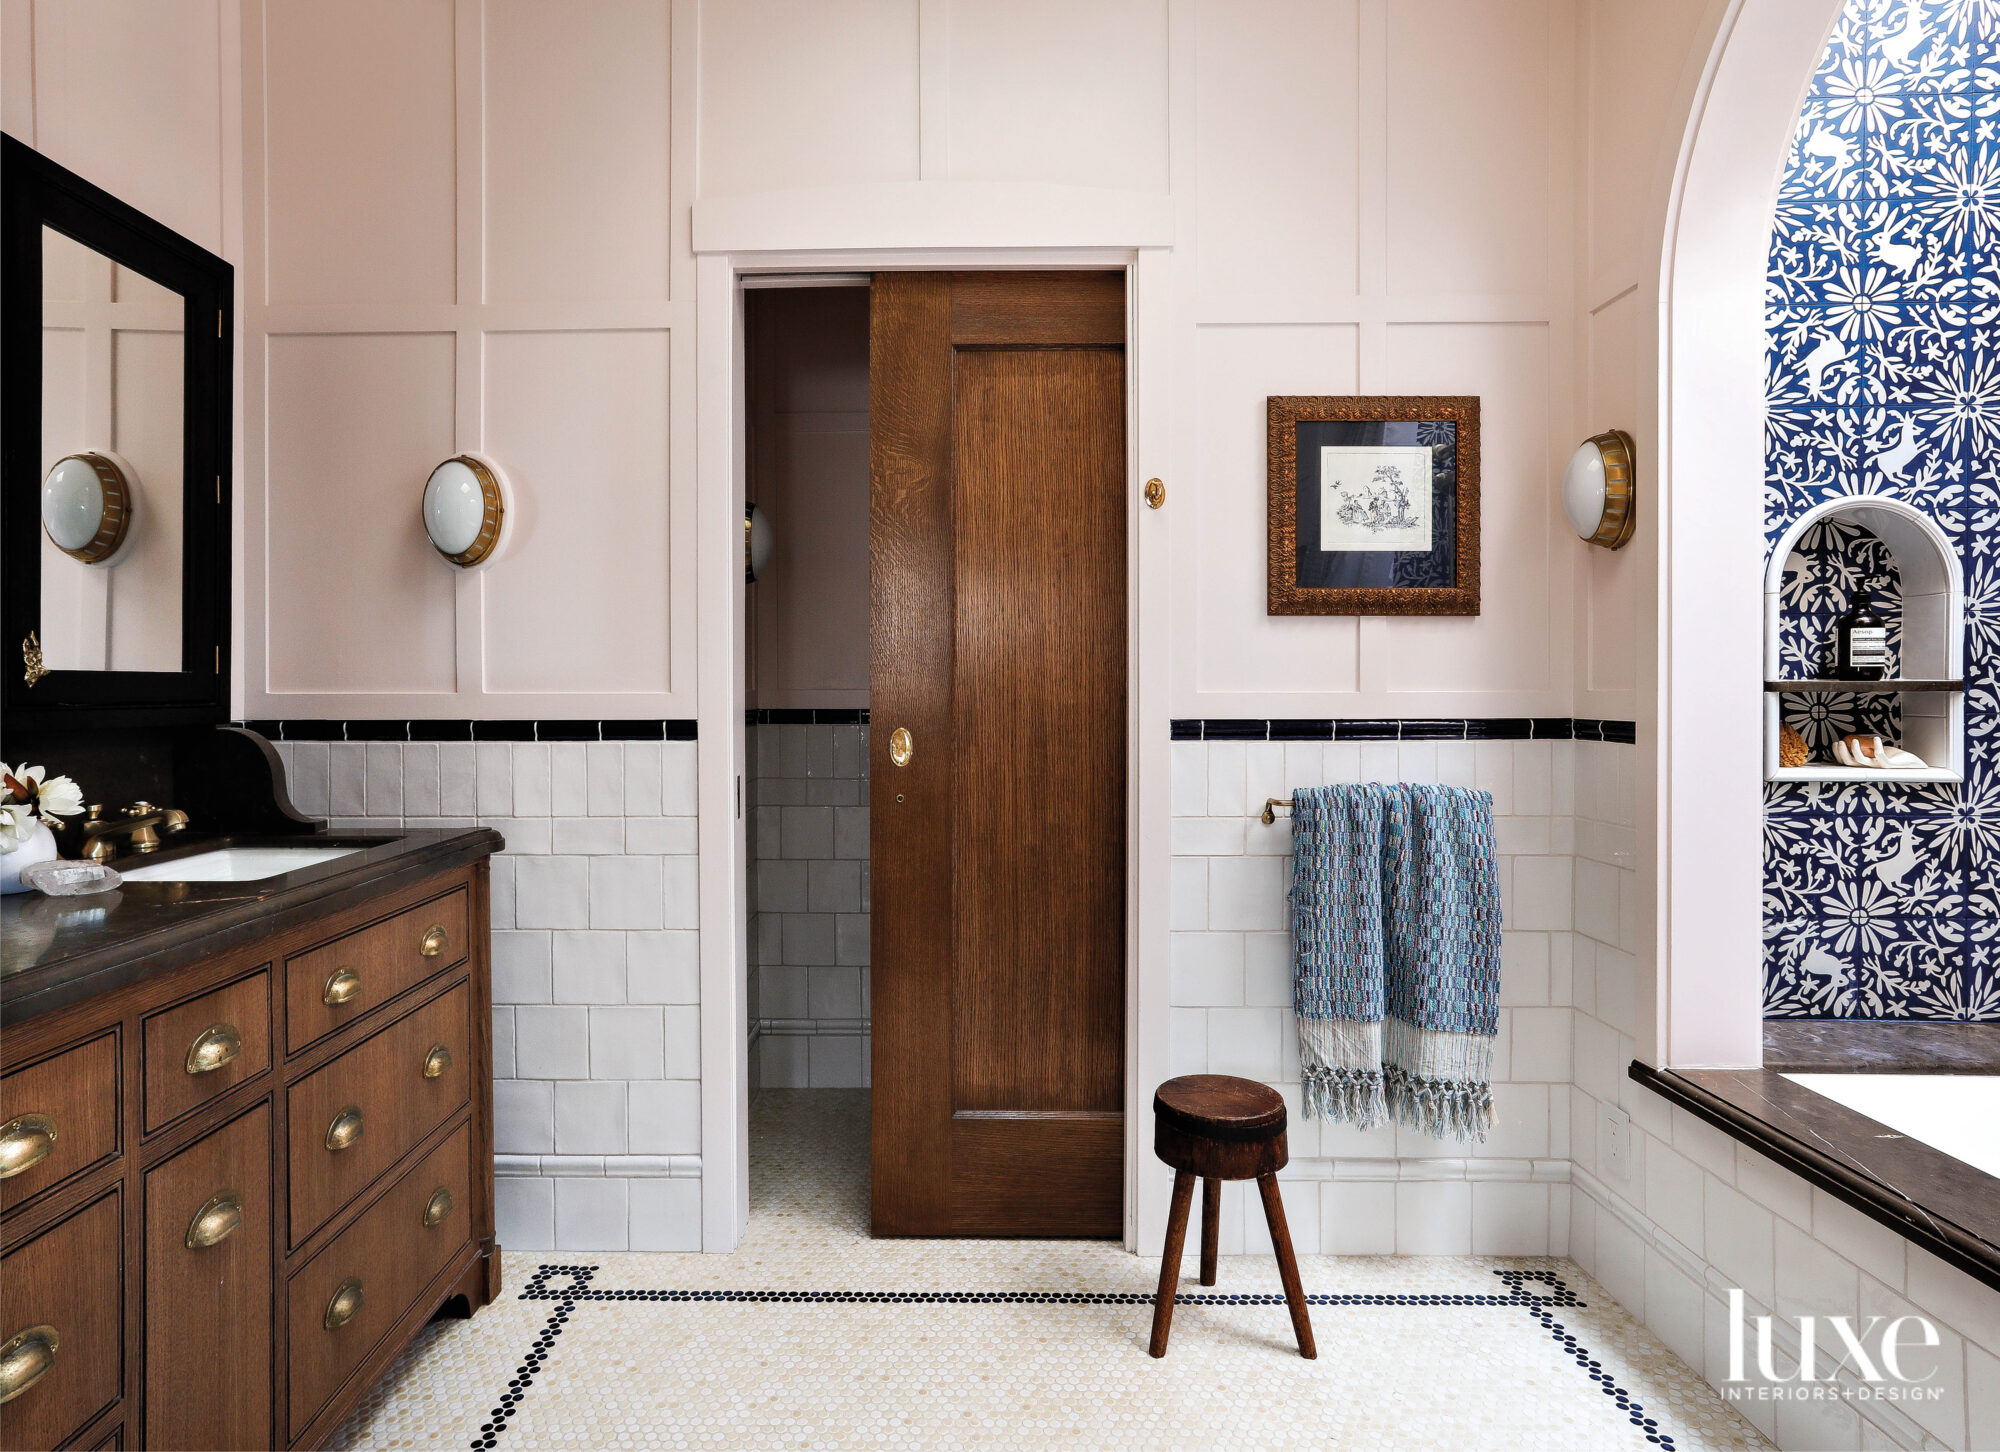 The master bathroom has light pink walls and white tile.